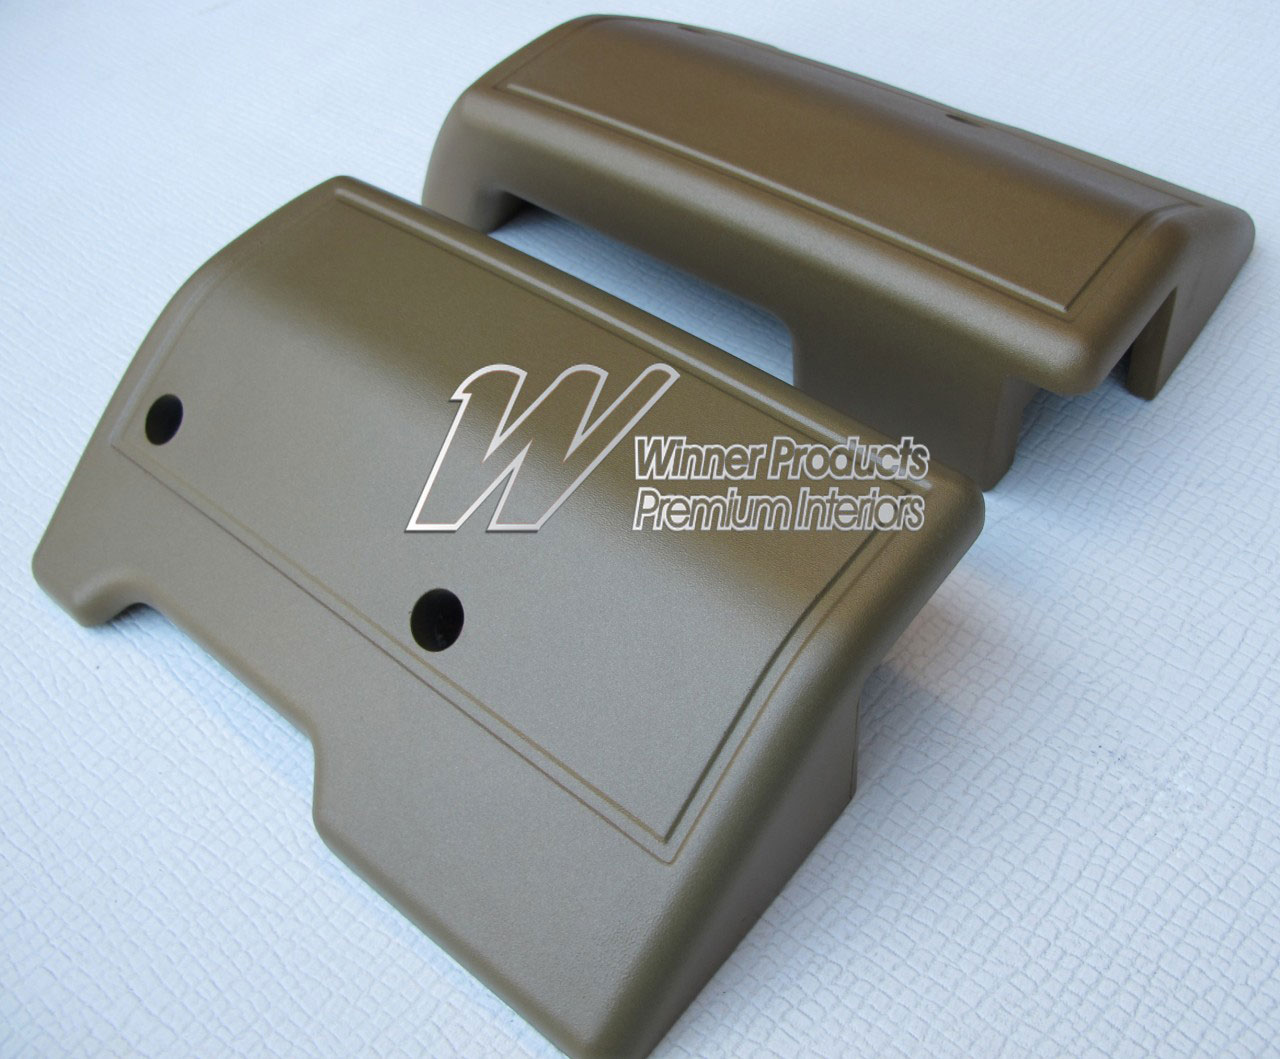 Holden Monaro HT Monaro GTS Coupe 11X Antique Gold Arm Rests (Image 1 of 1)